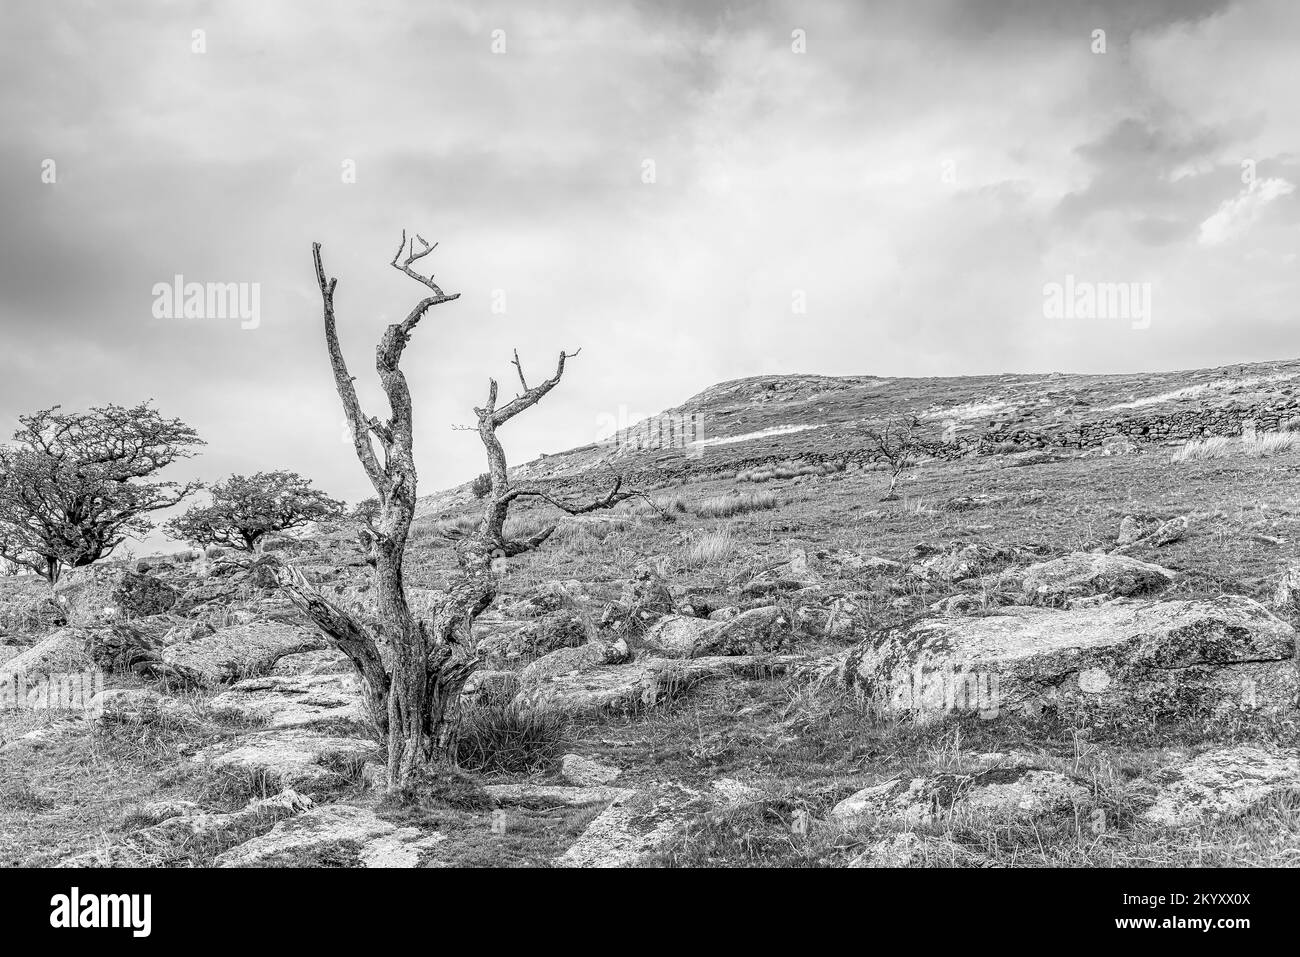 Dead tree in a landscape at the Dartmoor National Park, Devon, England, UK Stock Photo